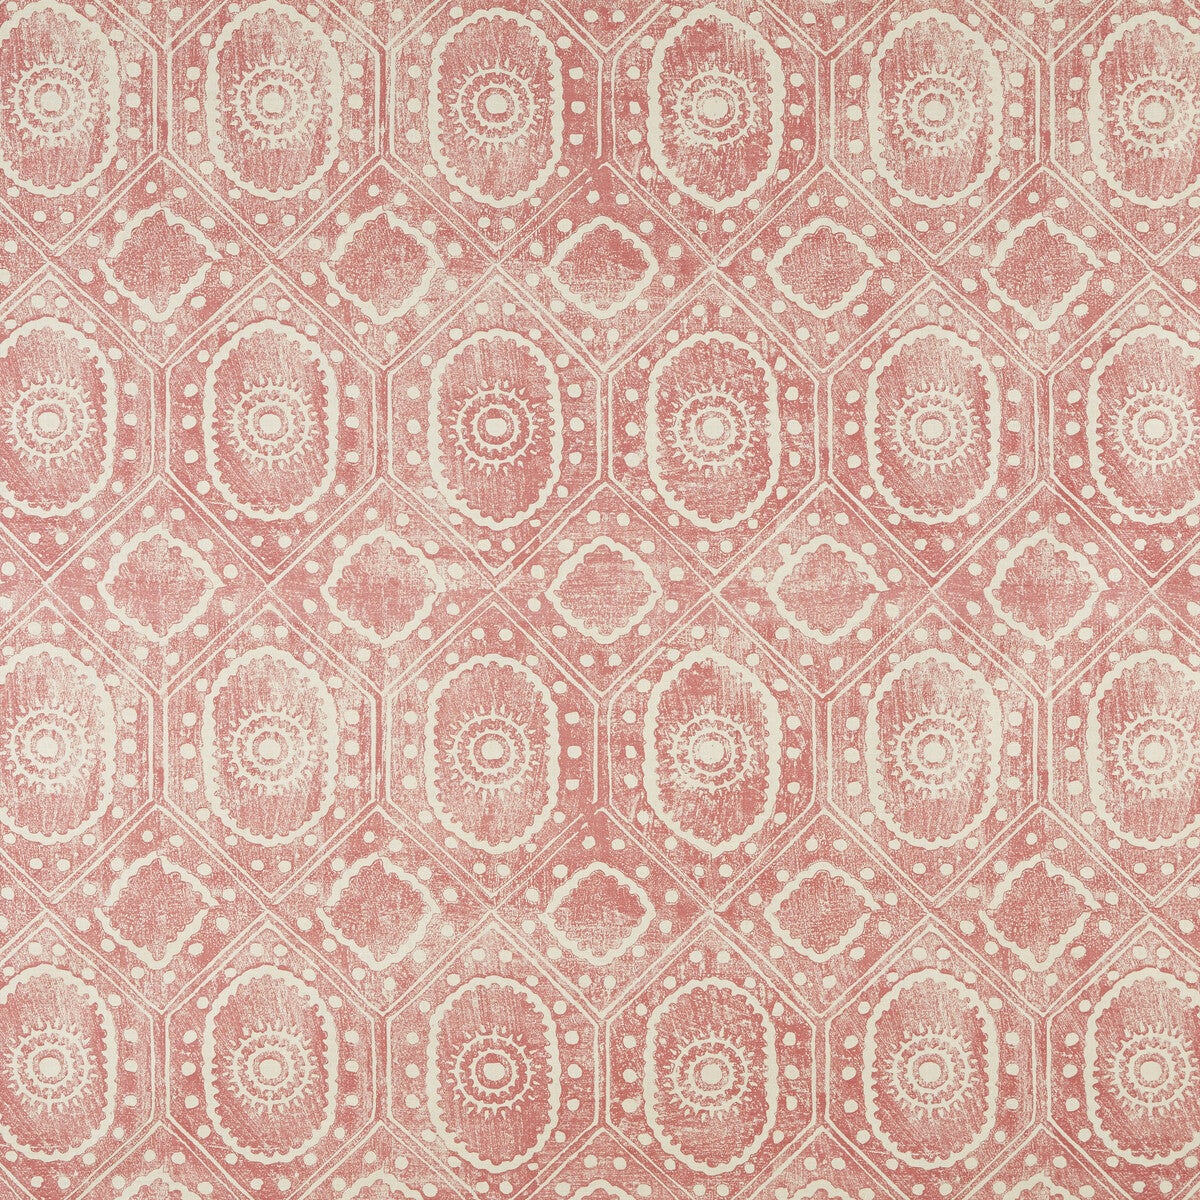 Diamond fabric in red color - pattern BFC-3643.19.0 - by Lee Jofa in the Blithfield collection